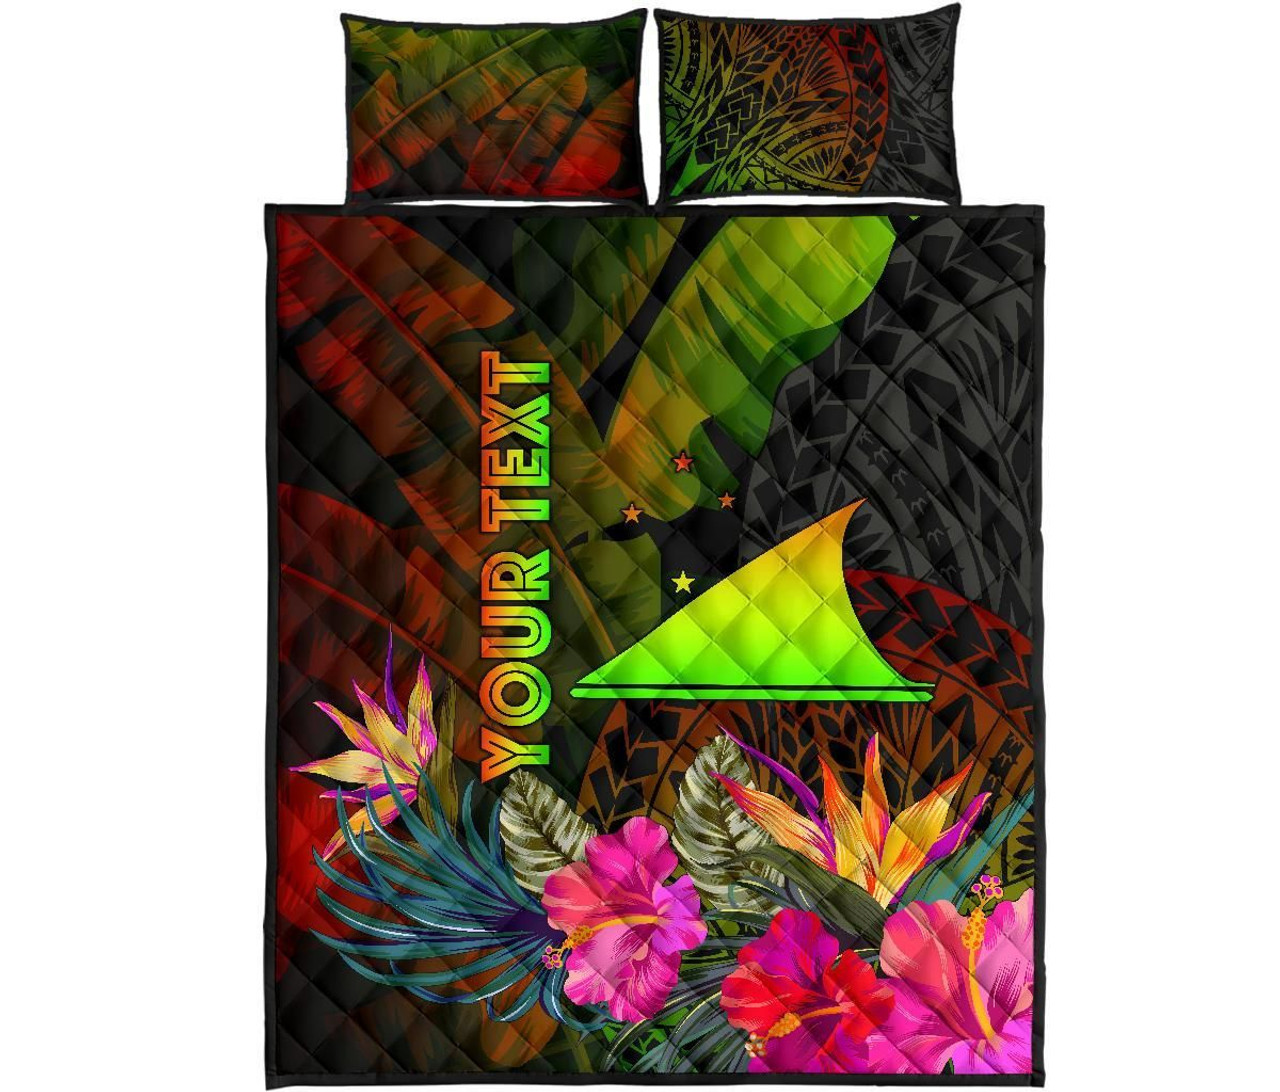 Tokelau Polynesian Personalised Quilt Bed Set - Hibiscus and Banana Leaves 5